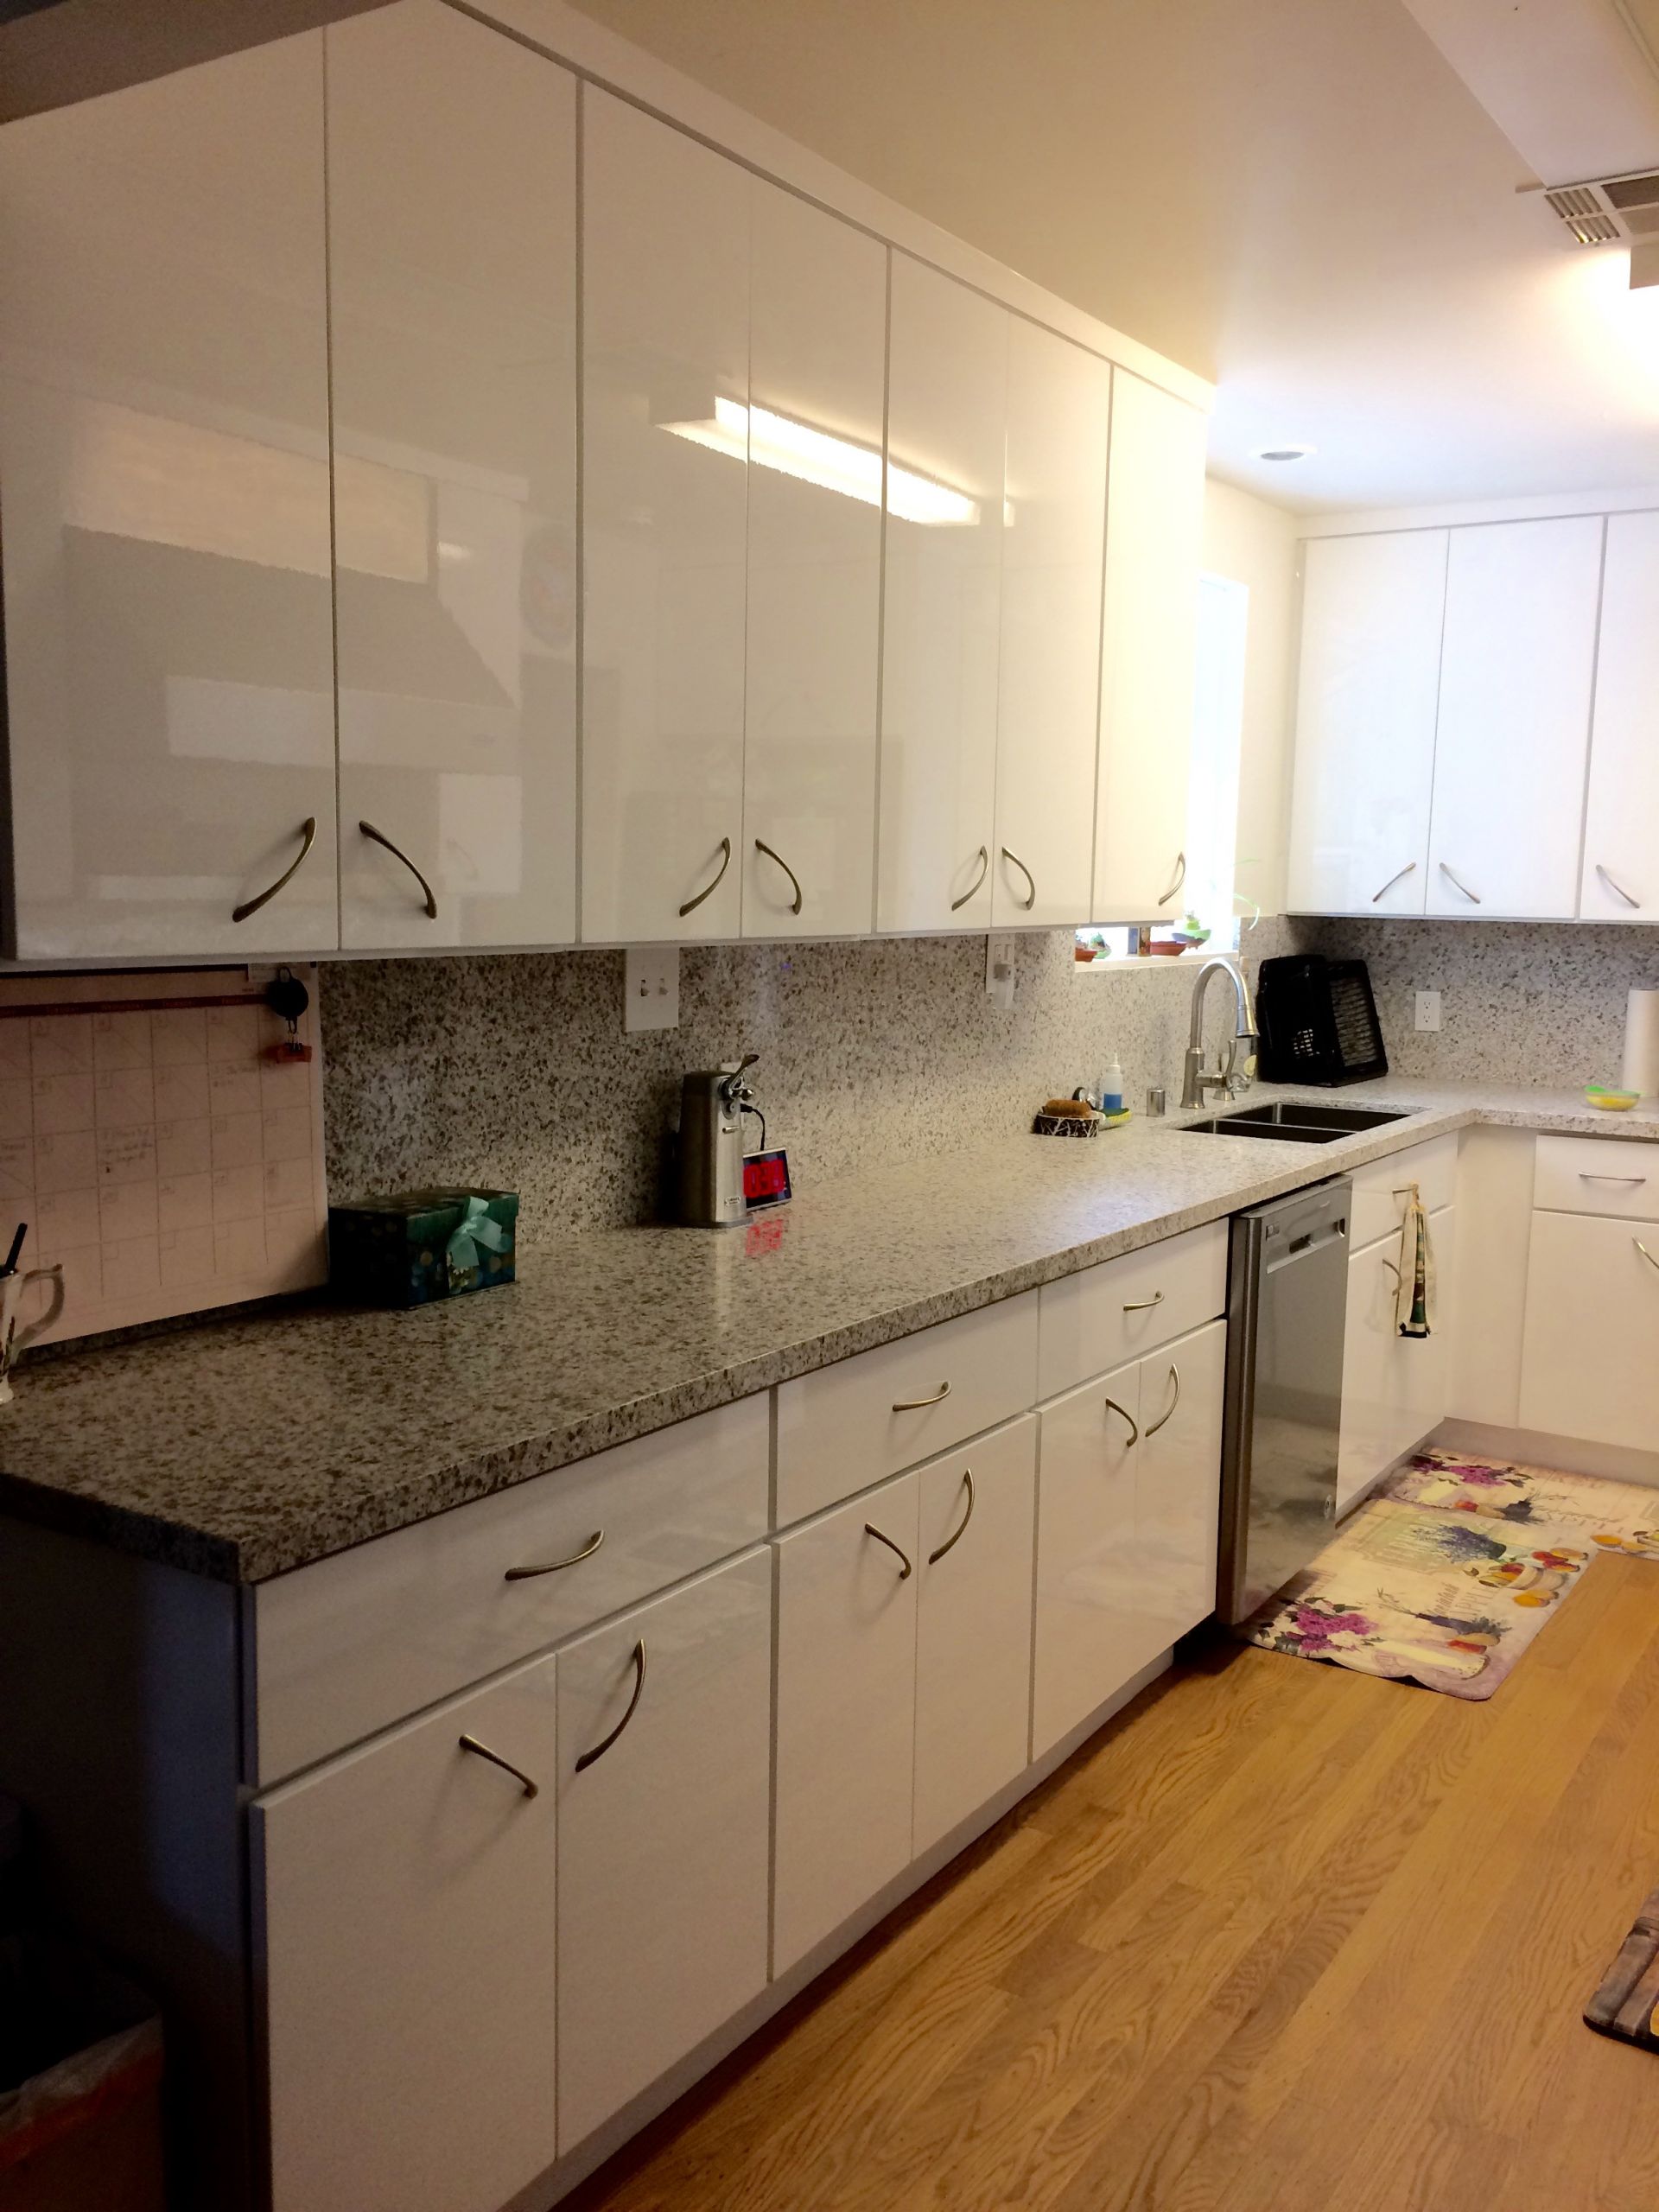 Flat Panel Kitchen Cabinets White
 DISCONTINUED High Gloss White Flat slab panel Cabinets